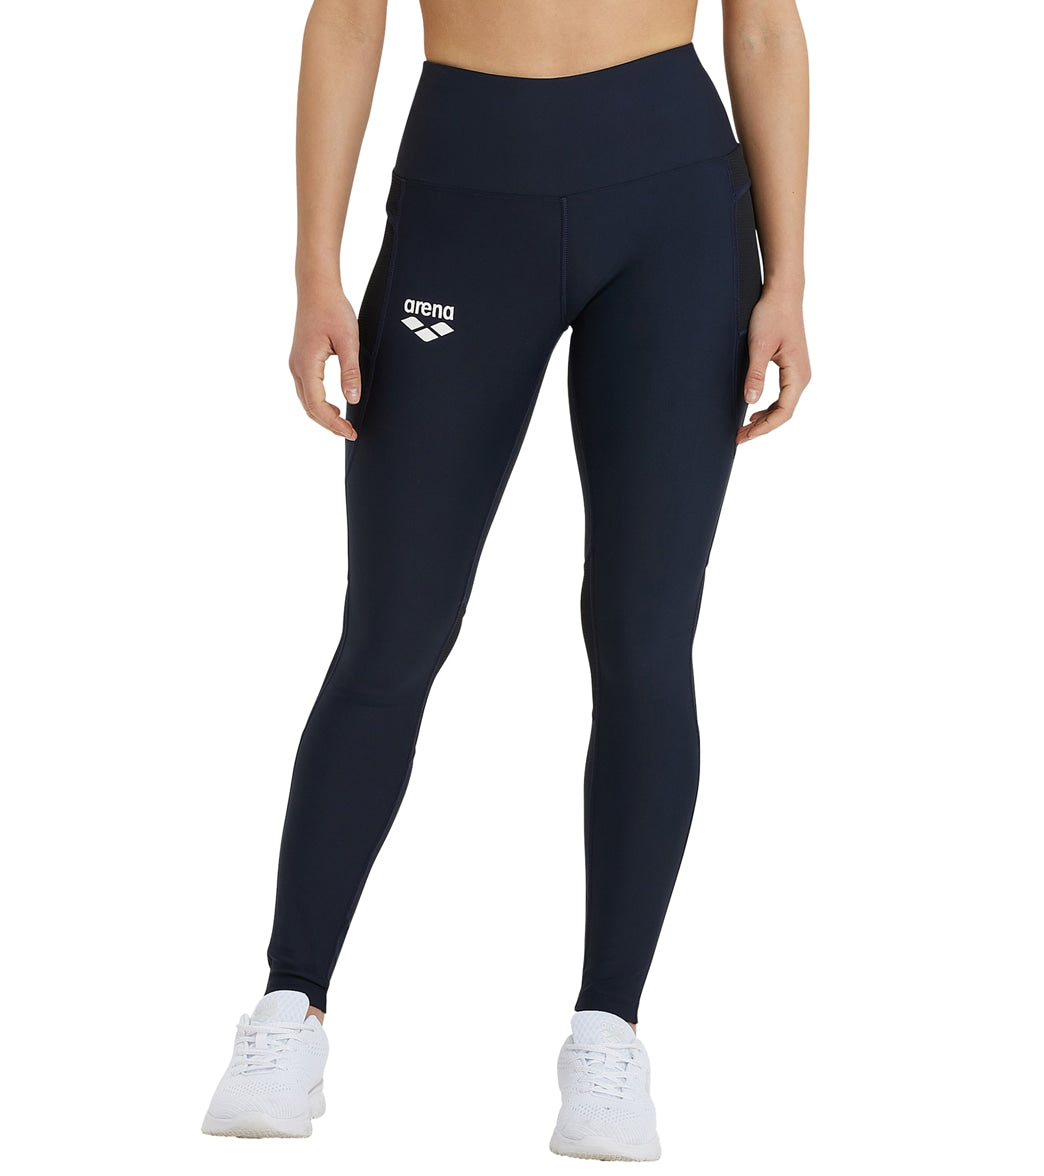 Arena Womens Team Panel Long Tights